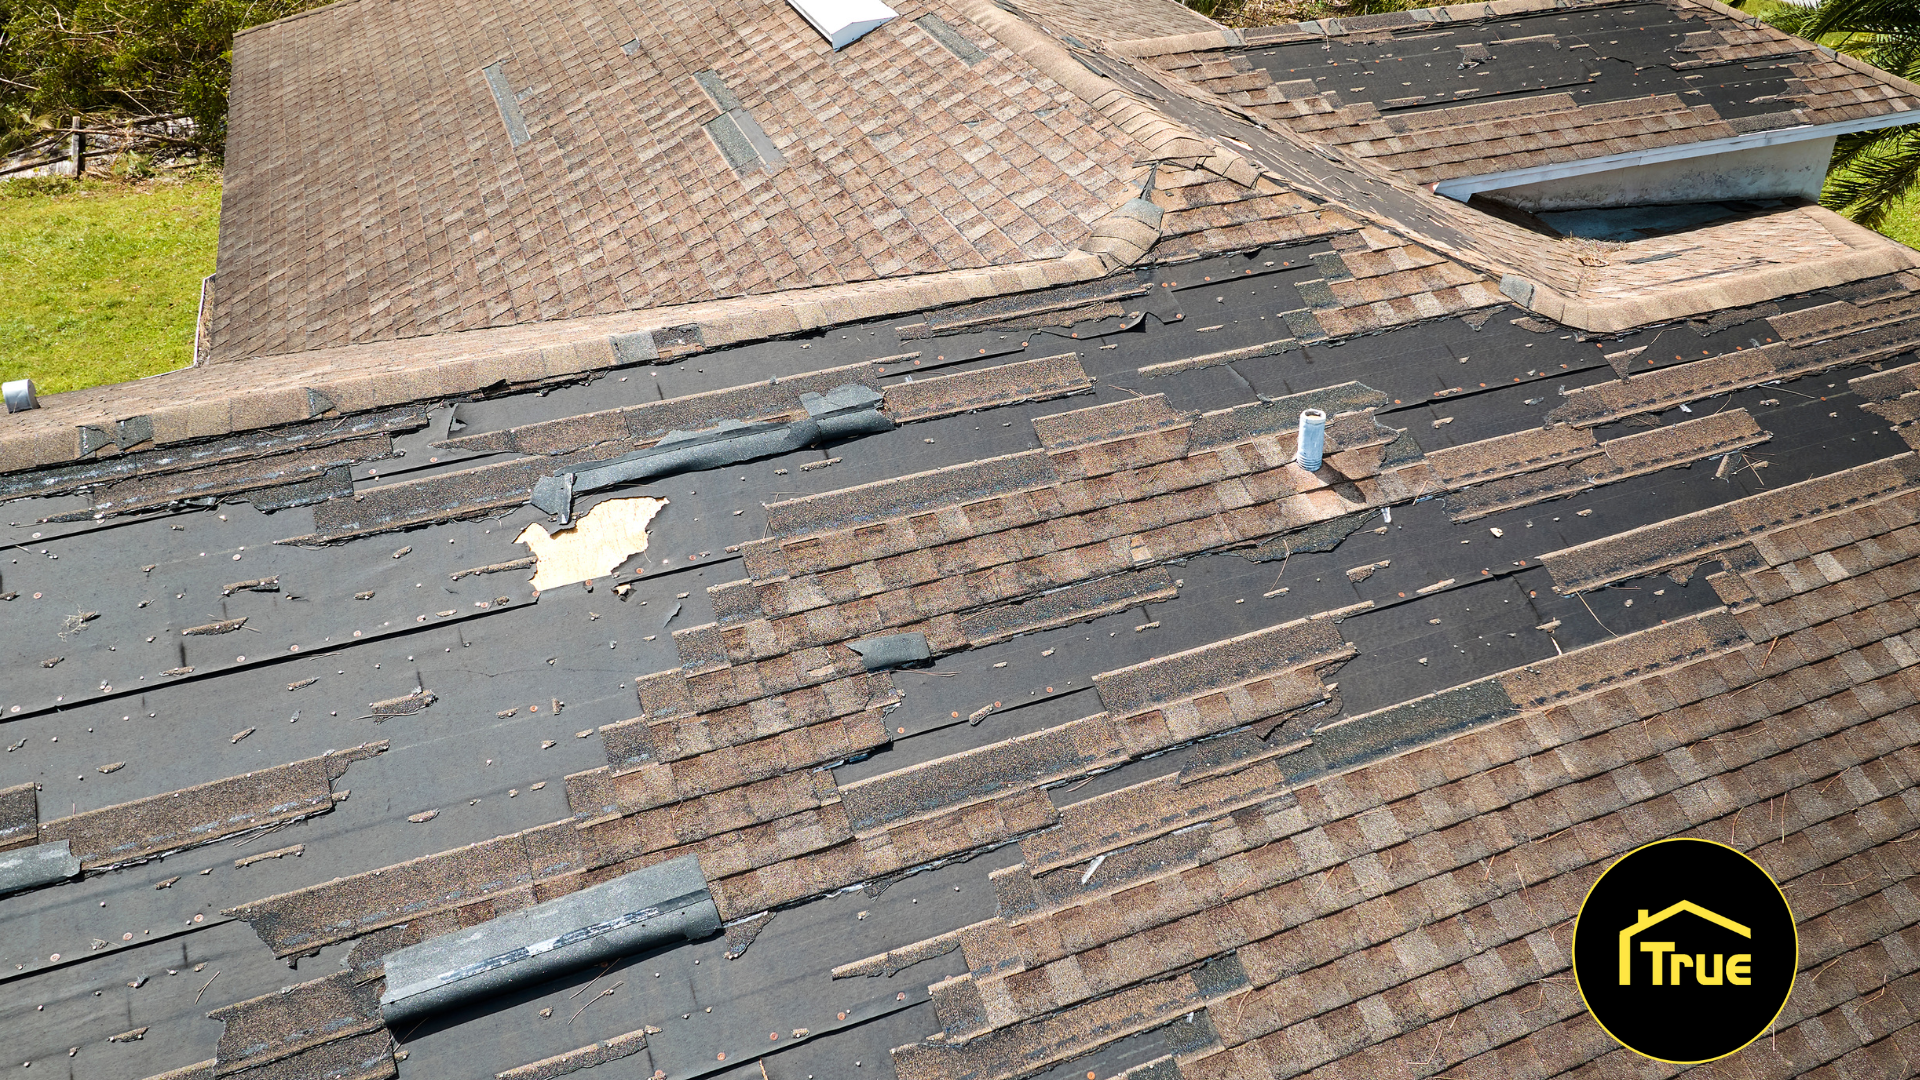 Will My Roof Leak if Some Shingles Blew Off?